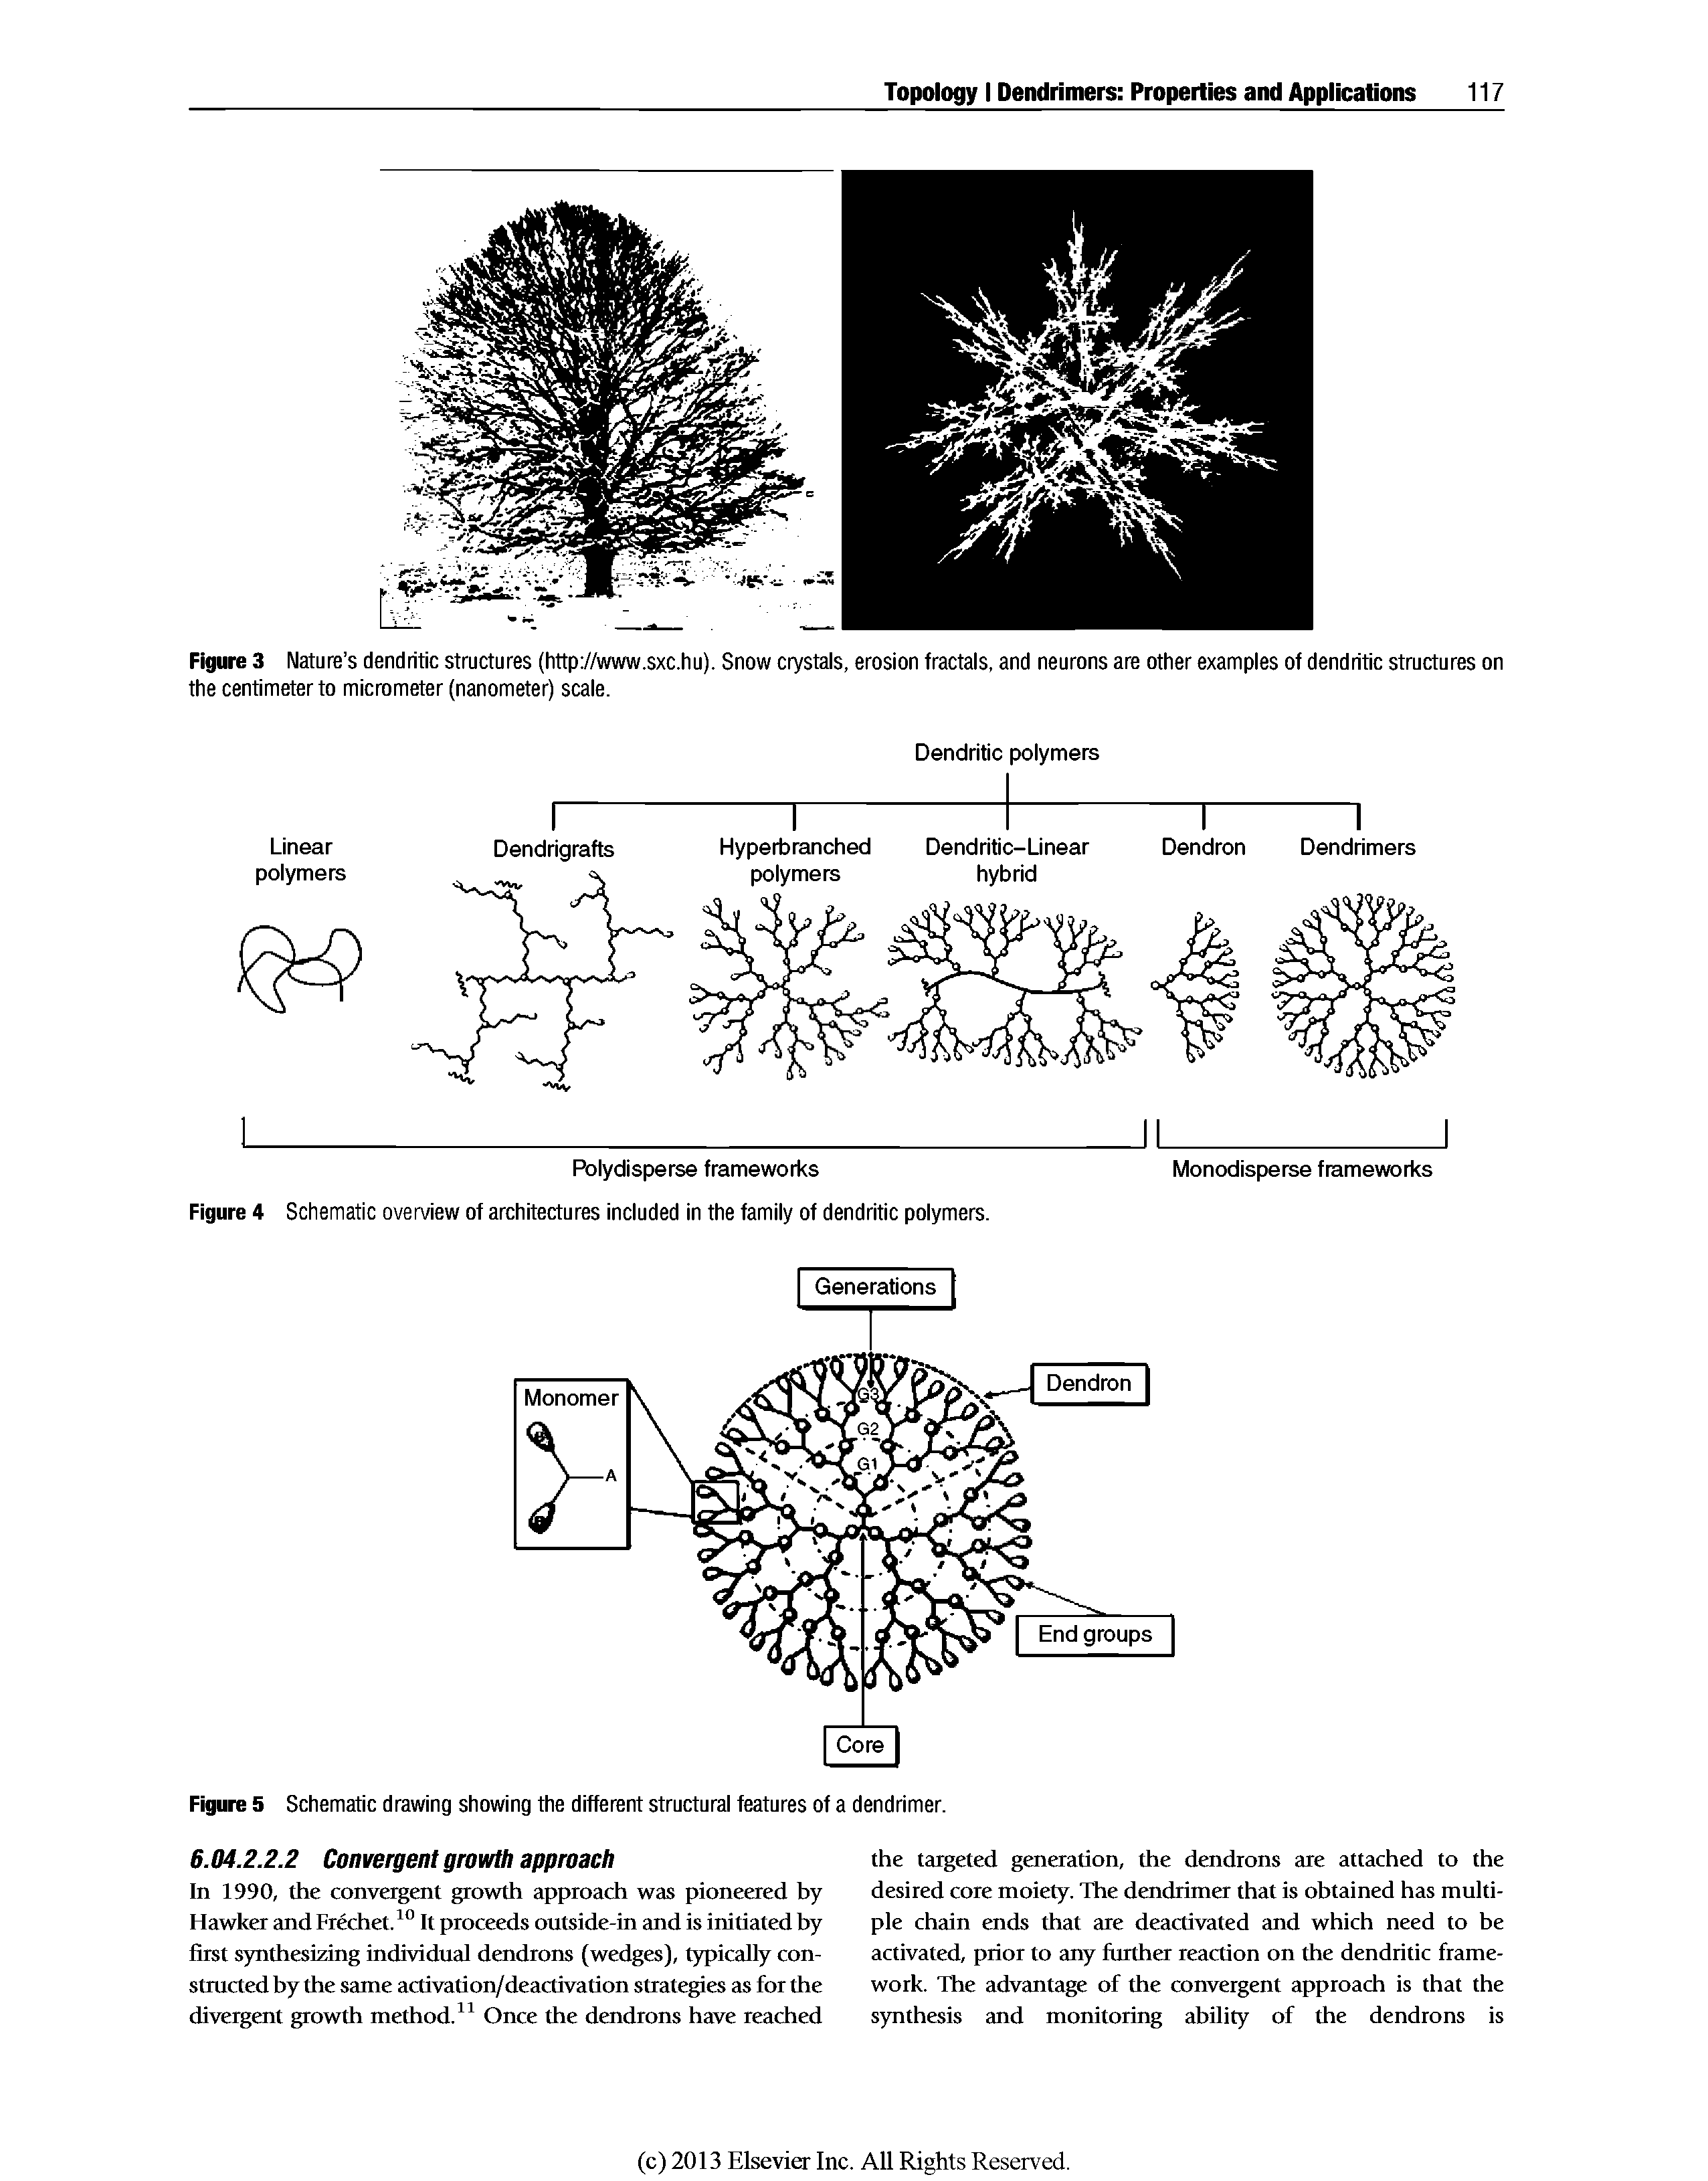 Figure 3 Nature s dendritic structures (http //www.sxc.hu). Snow crystals, erosion fractals, and neurons are other examples of dendritic structures on the centimeter to micrometer (nanometer) scale.